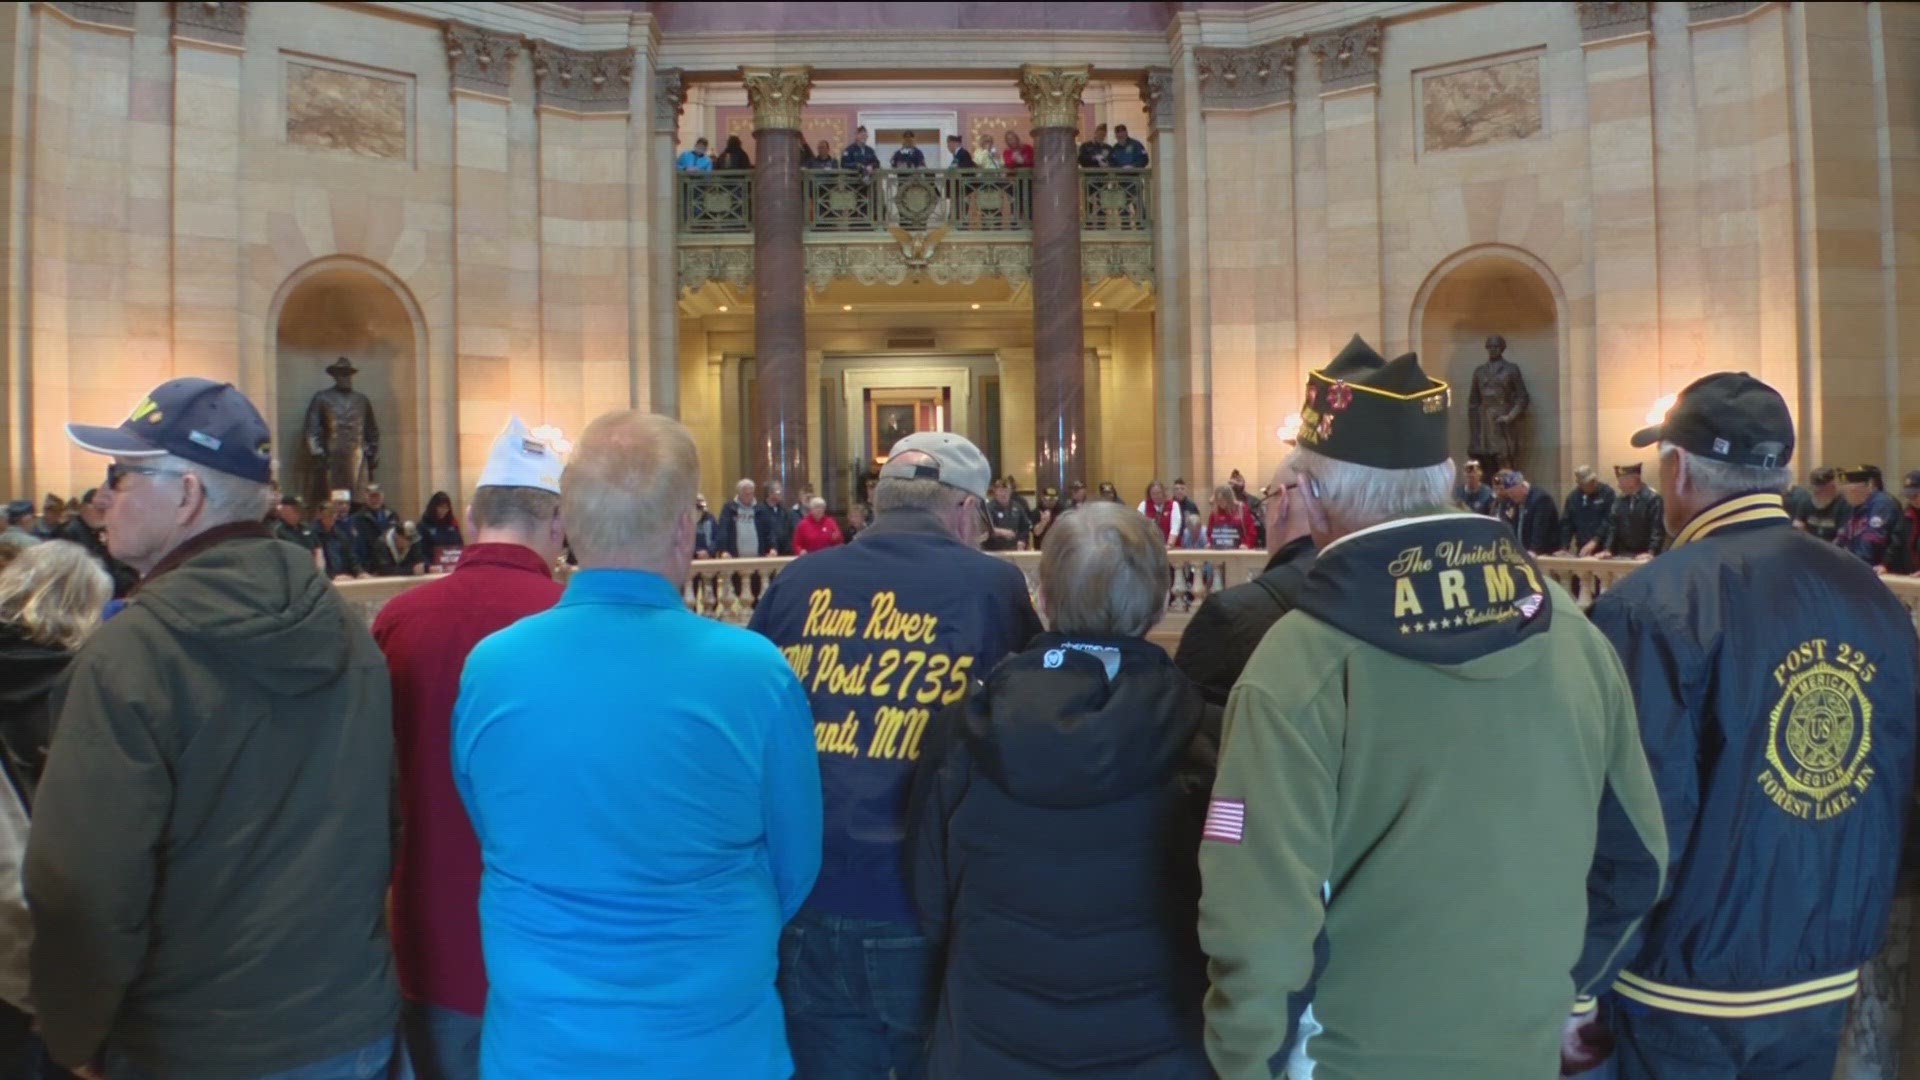 Veterans and their loved ones traveled to the Capitol Wednesday to voice concerns, placing emphasis on ending homelessness for their fellow service men and women.